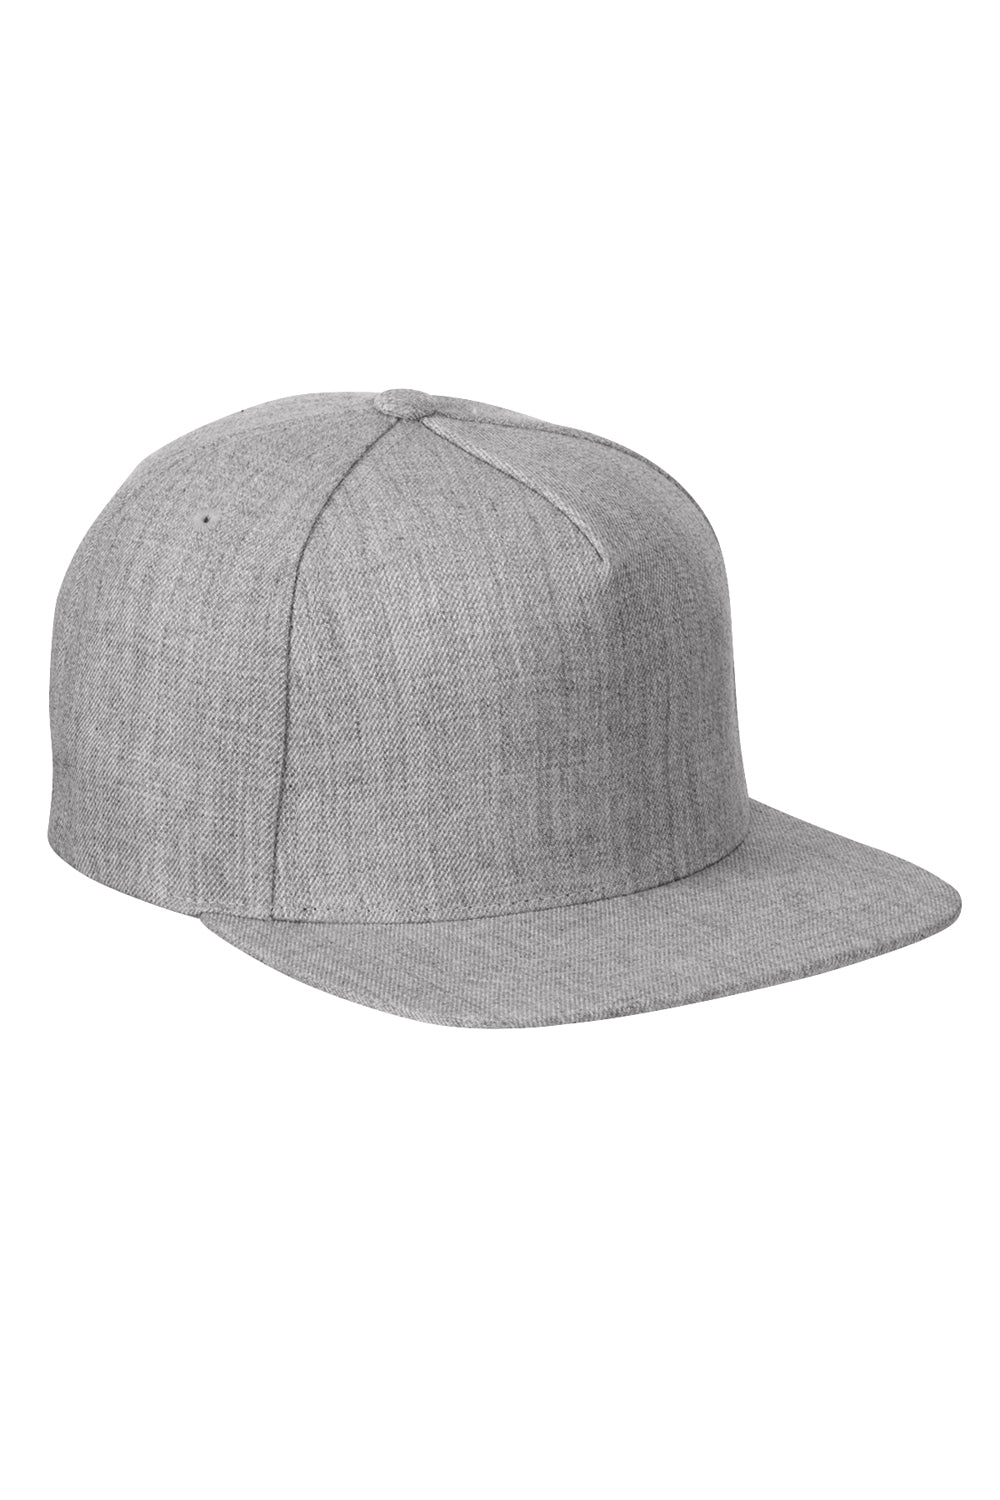 Yupoong YP5089 Mens Adjustable Hat Heather Grey Front